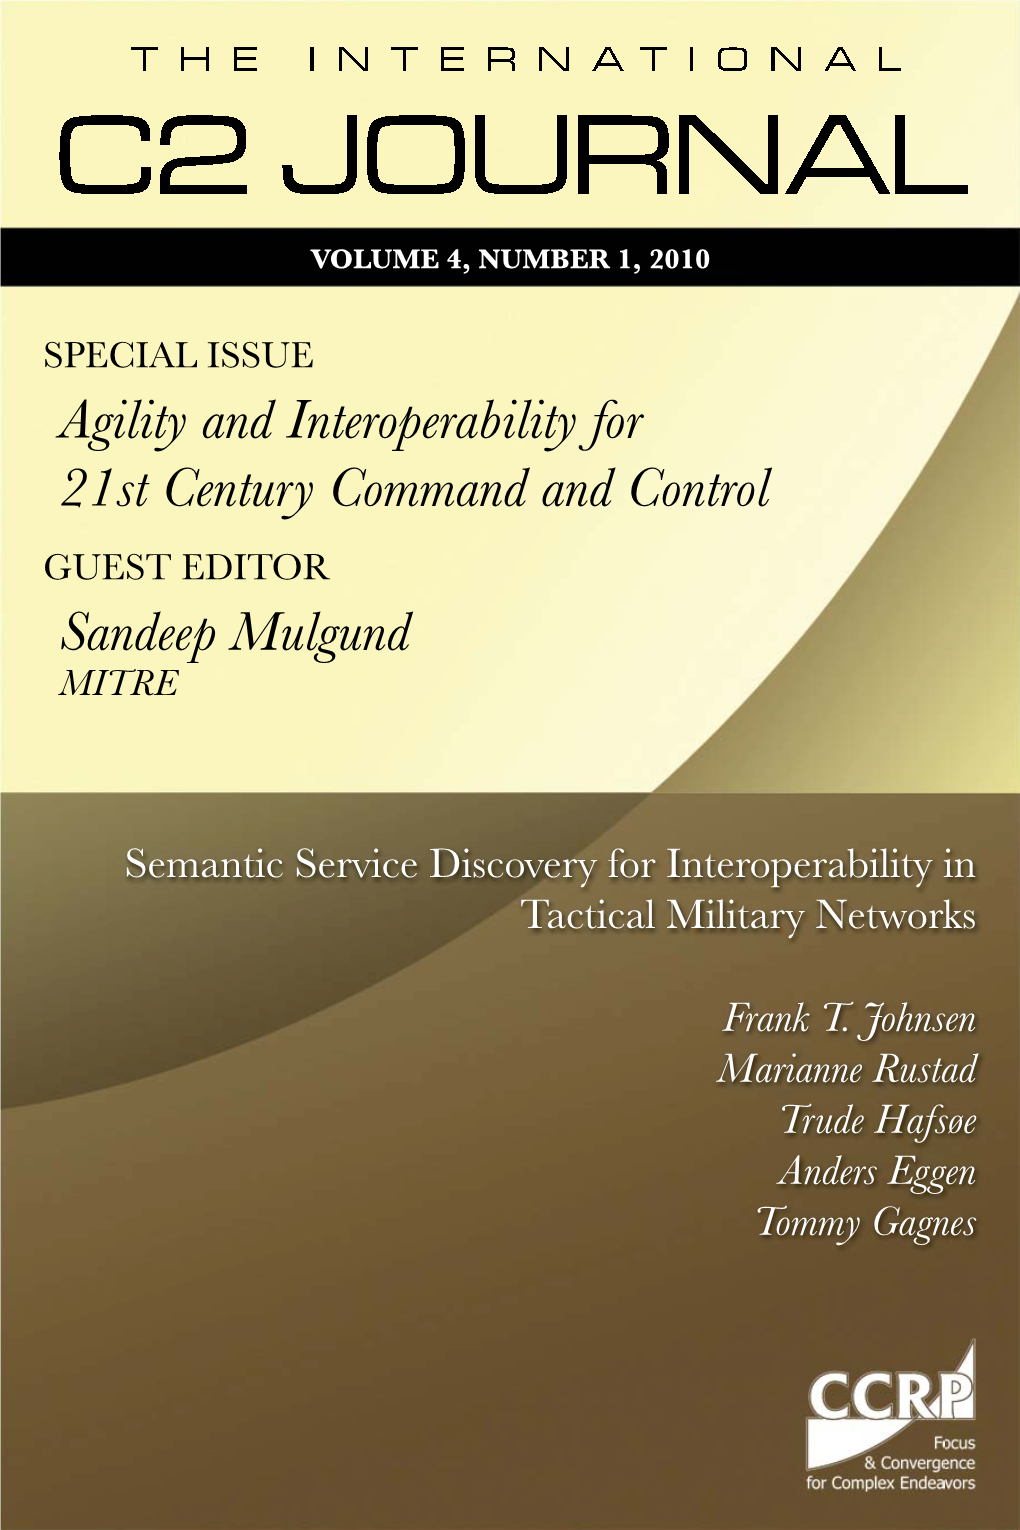 Semantic Service Discovery for Interoperability in Tactical Military Networks